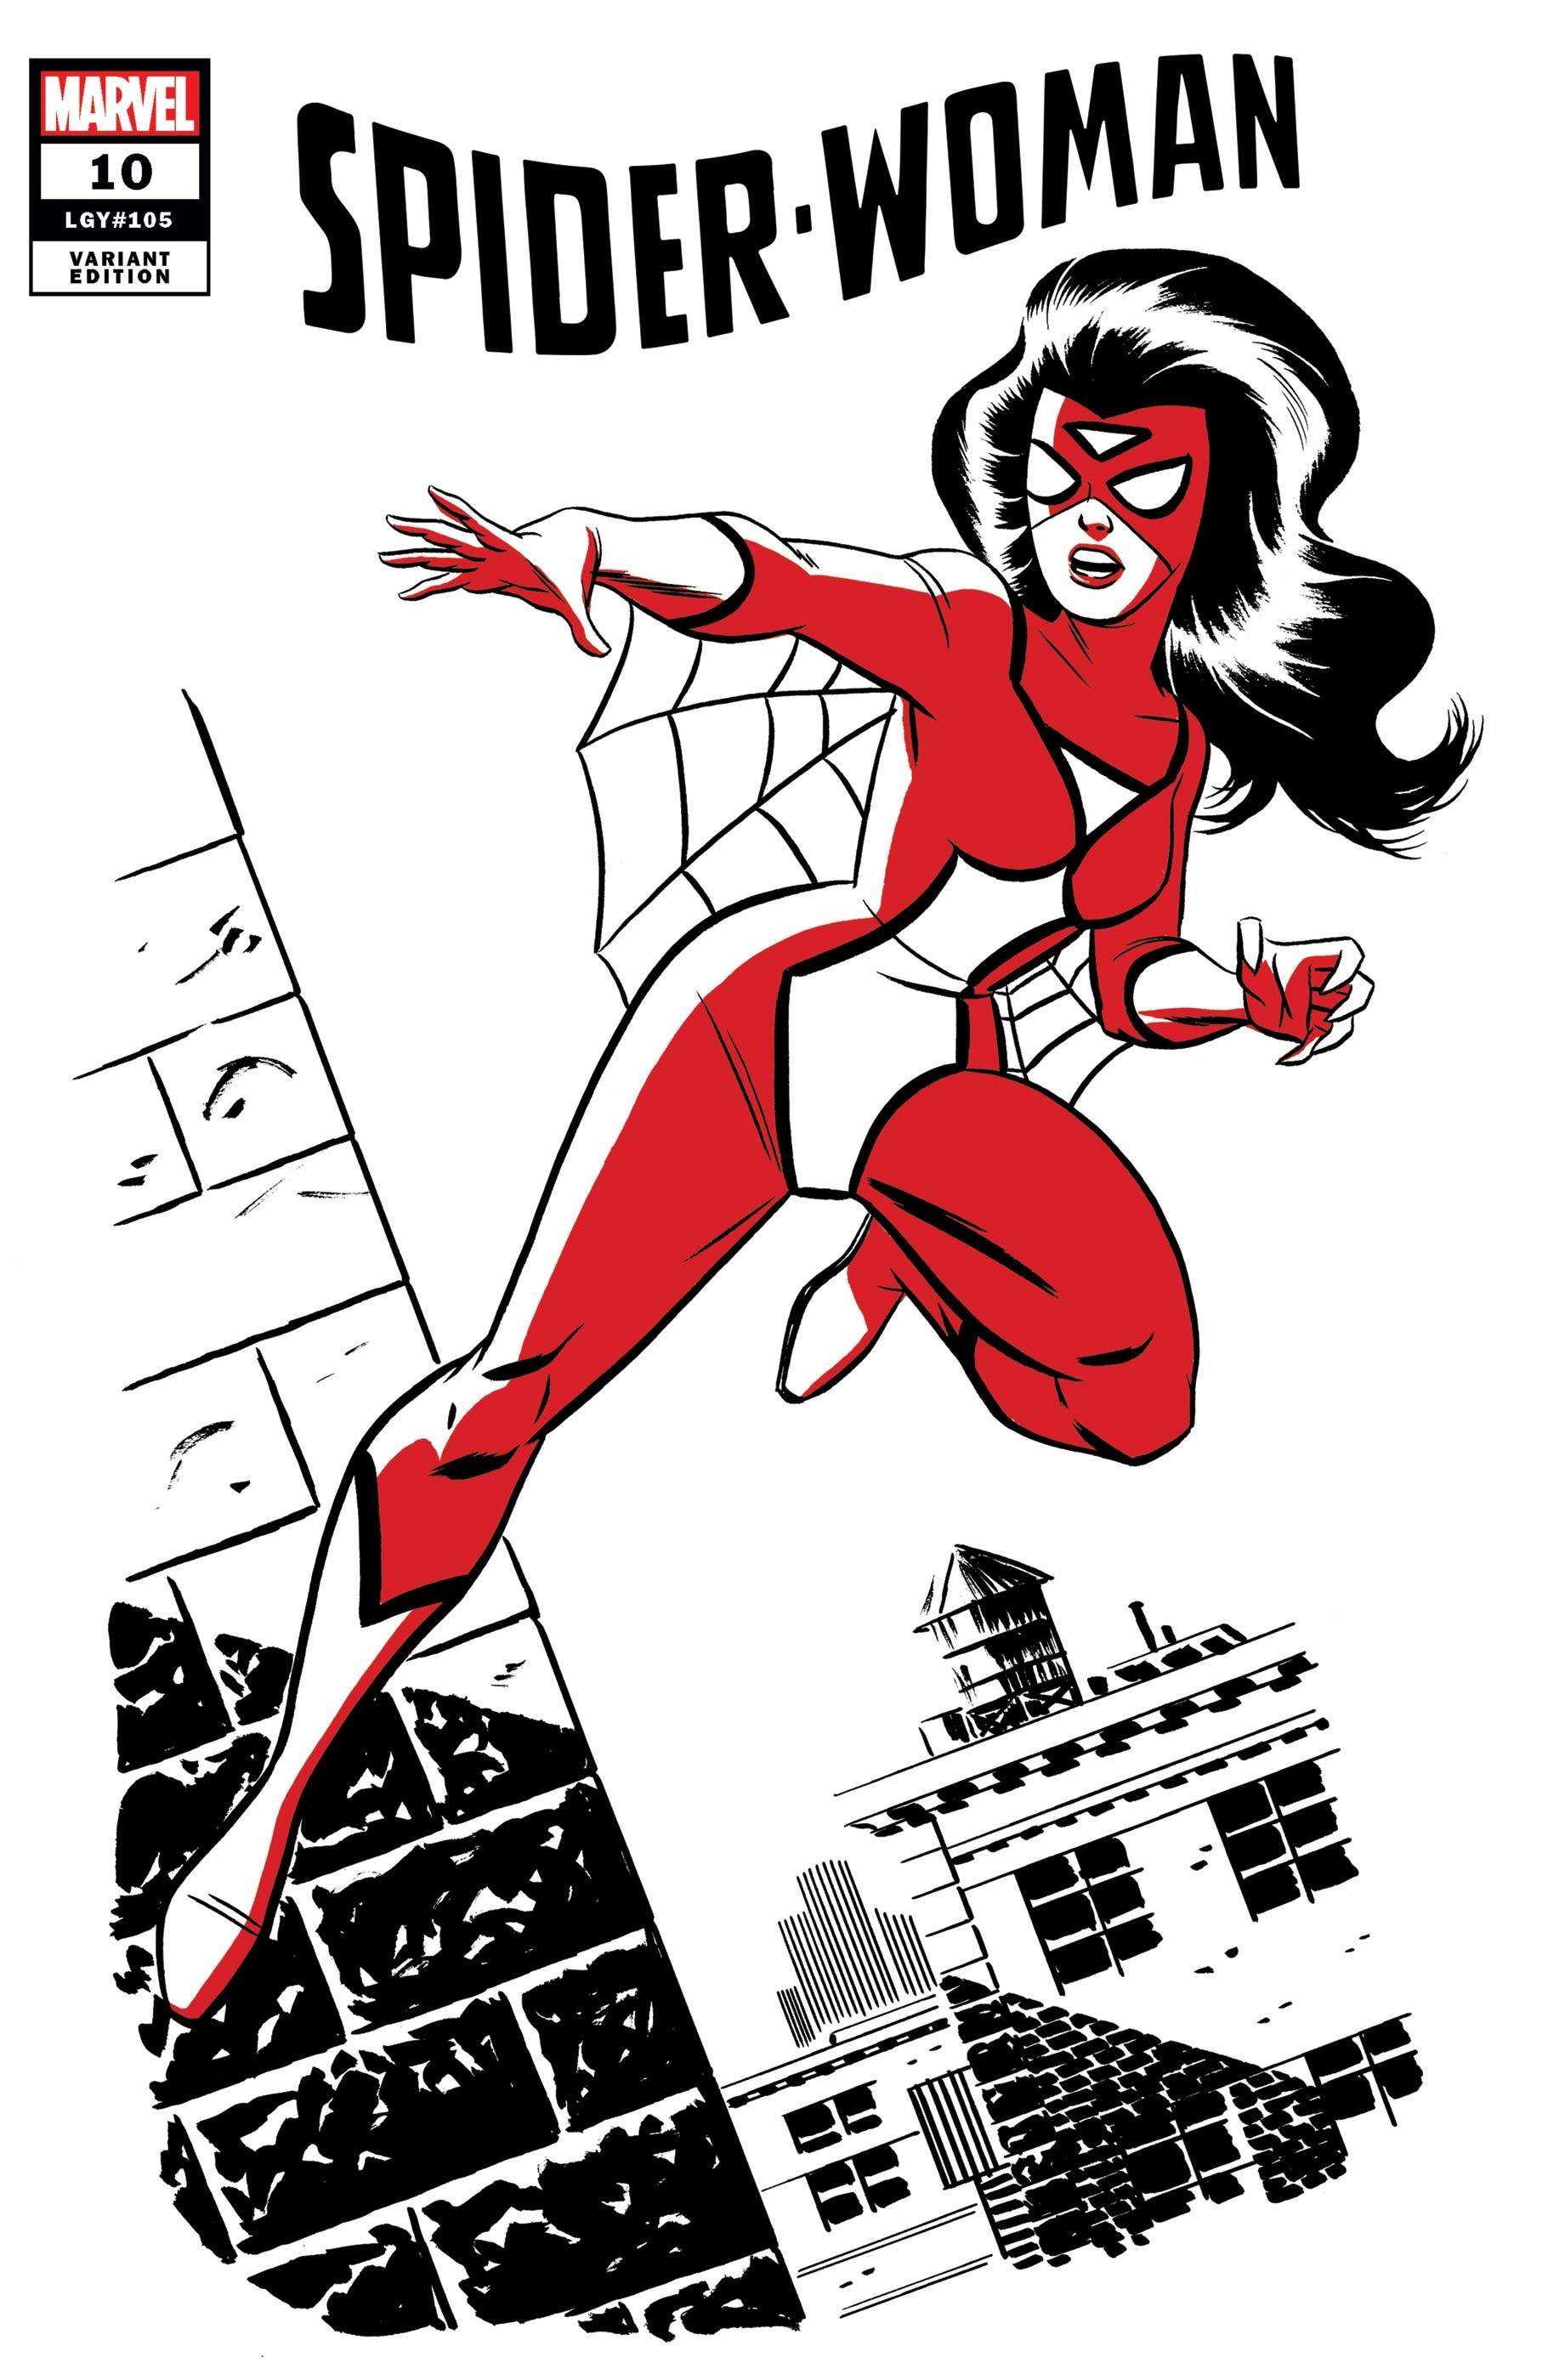 Spider-Woman #10 Michael Cho Spider-Woman Two-Tone Variant (2020)